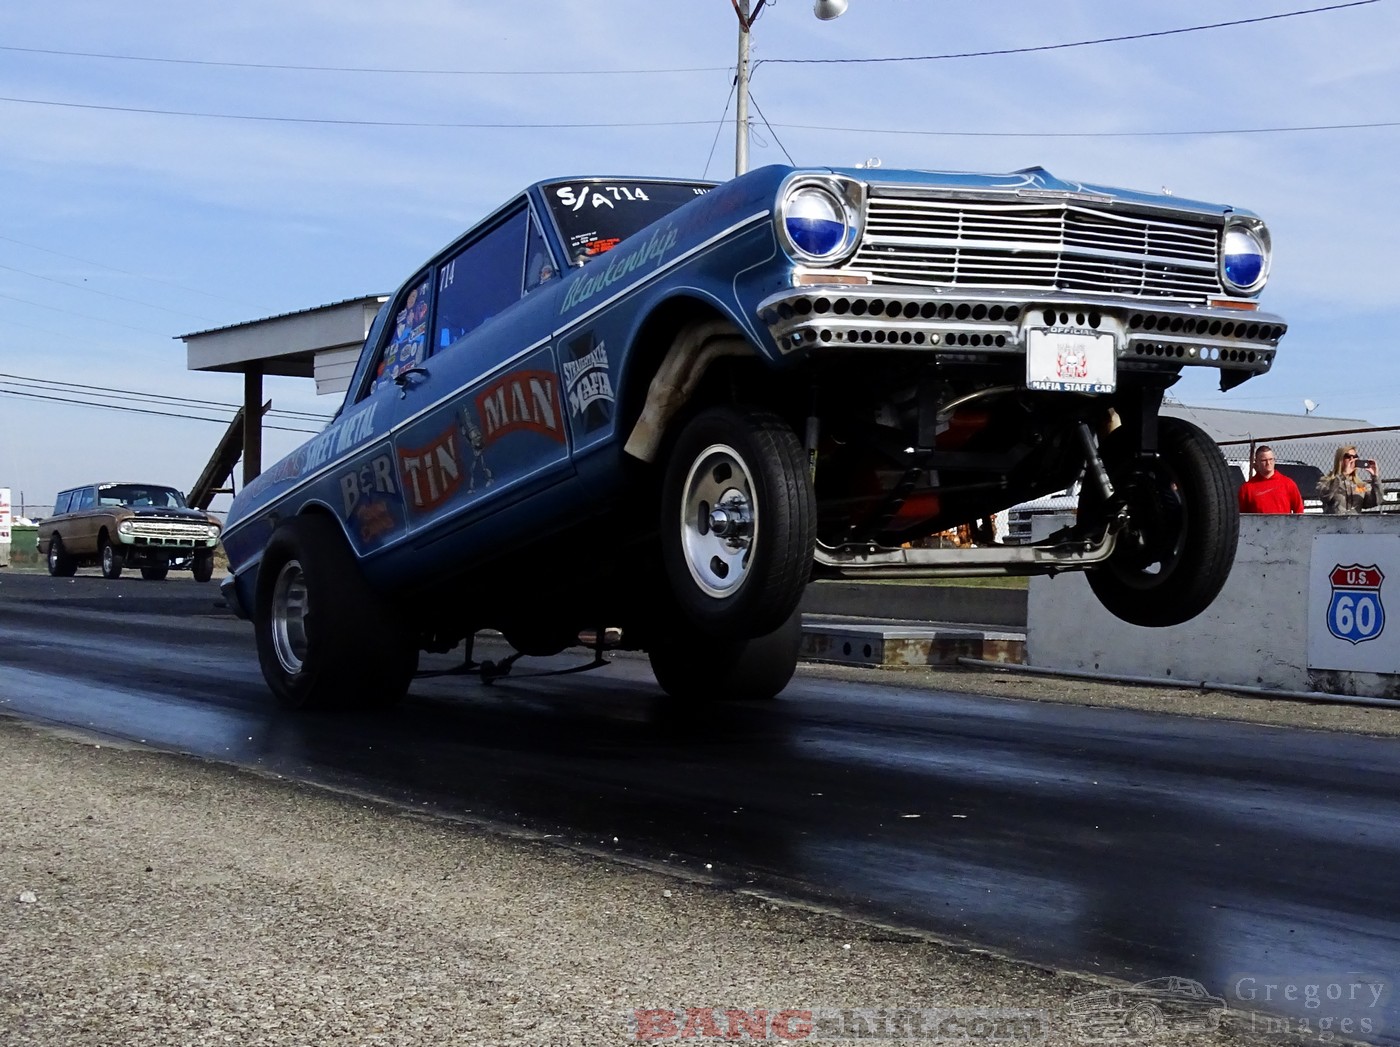 Wrinkled Tires and Wonderful Wheelies at US60 Dragway – Action Photos!